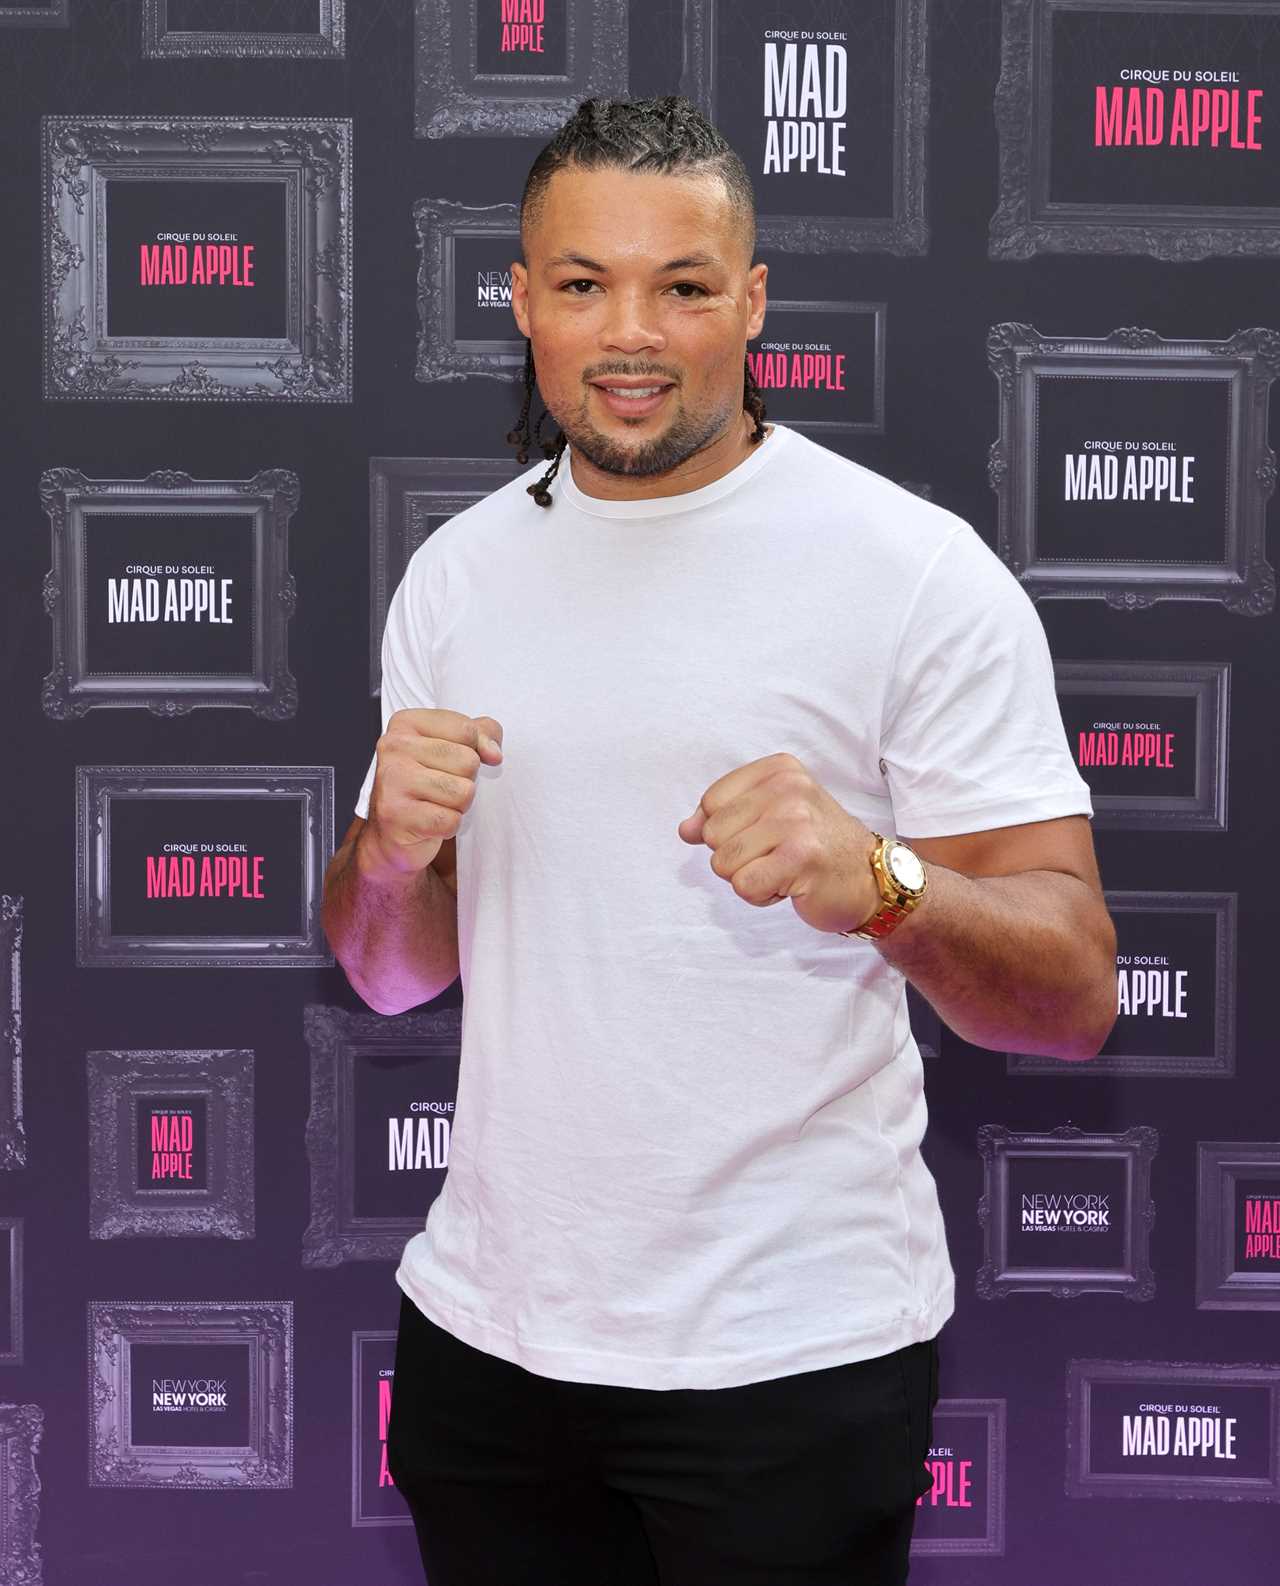 Joe Joyce hires a speaking coach for a Brit heavyweight who is desperate to trash-talk his path to the Anthony Joshua blockbuster